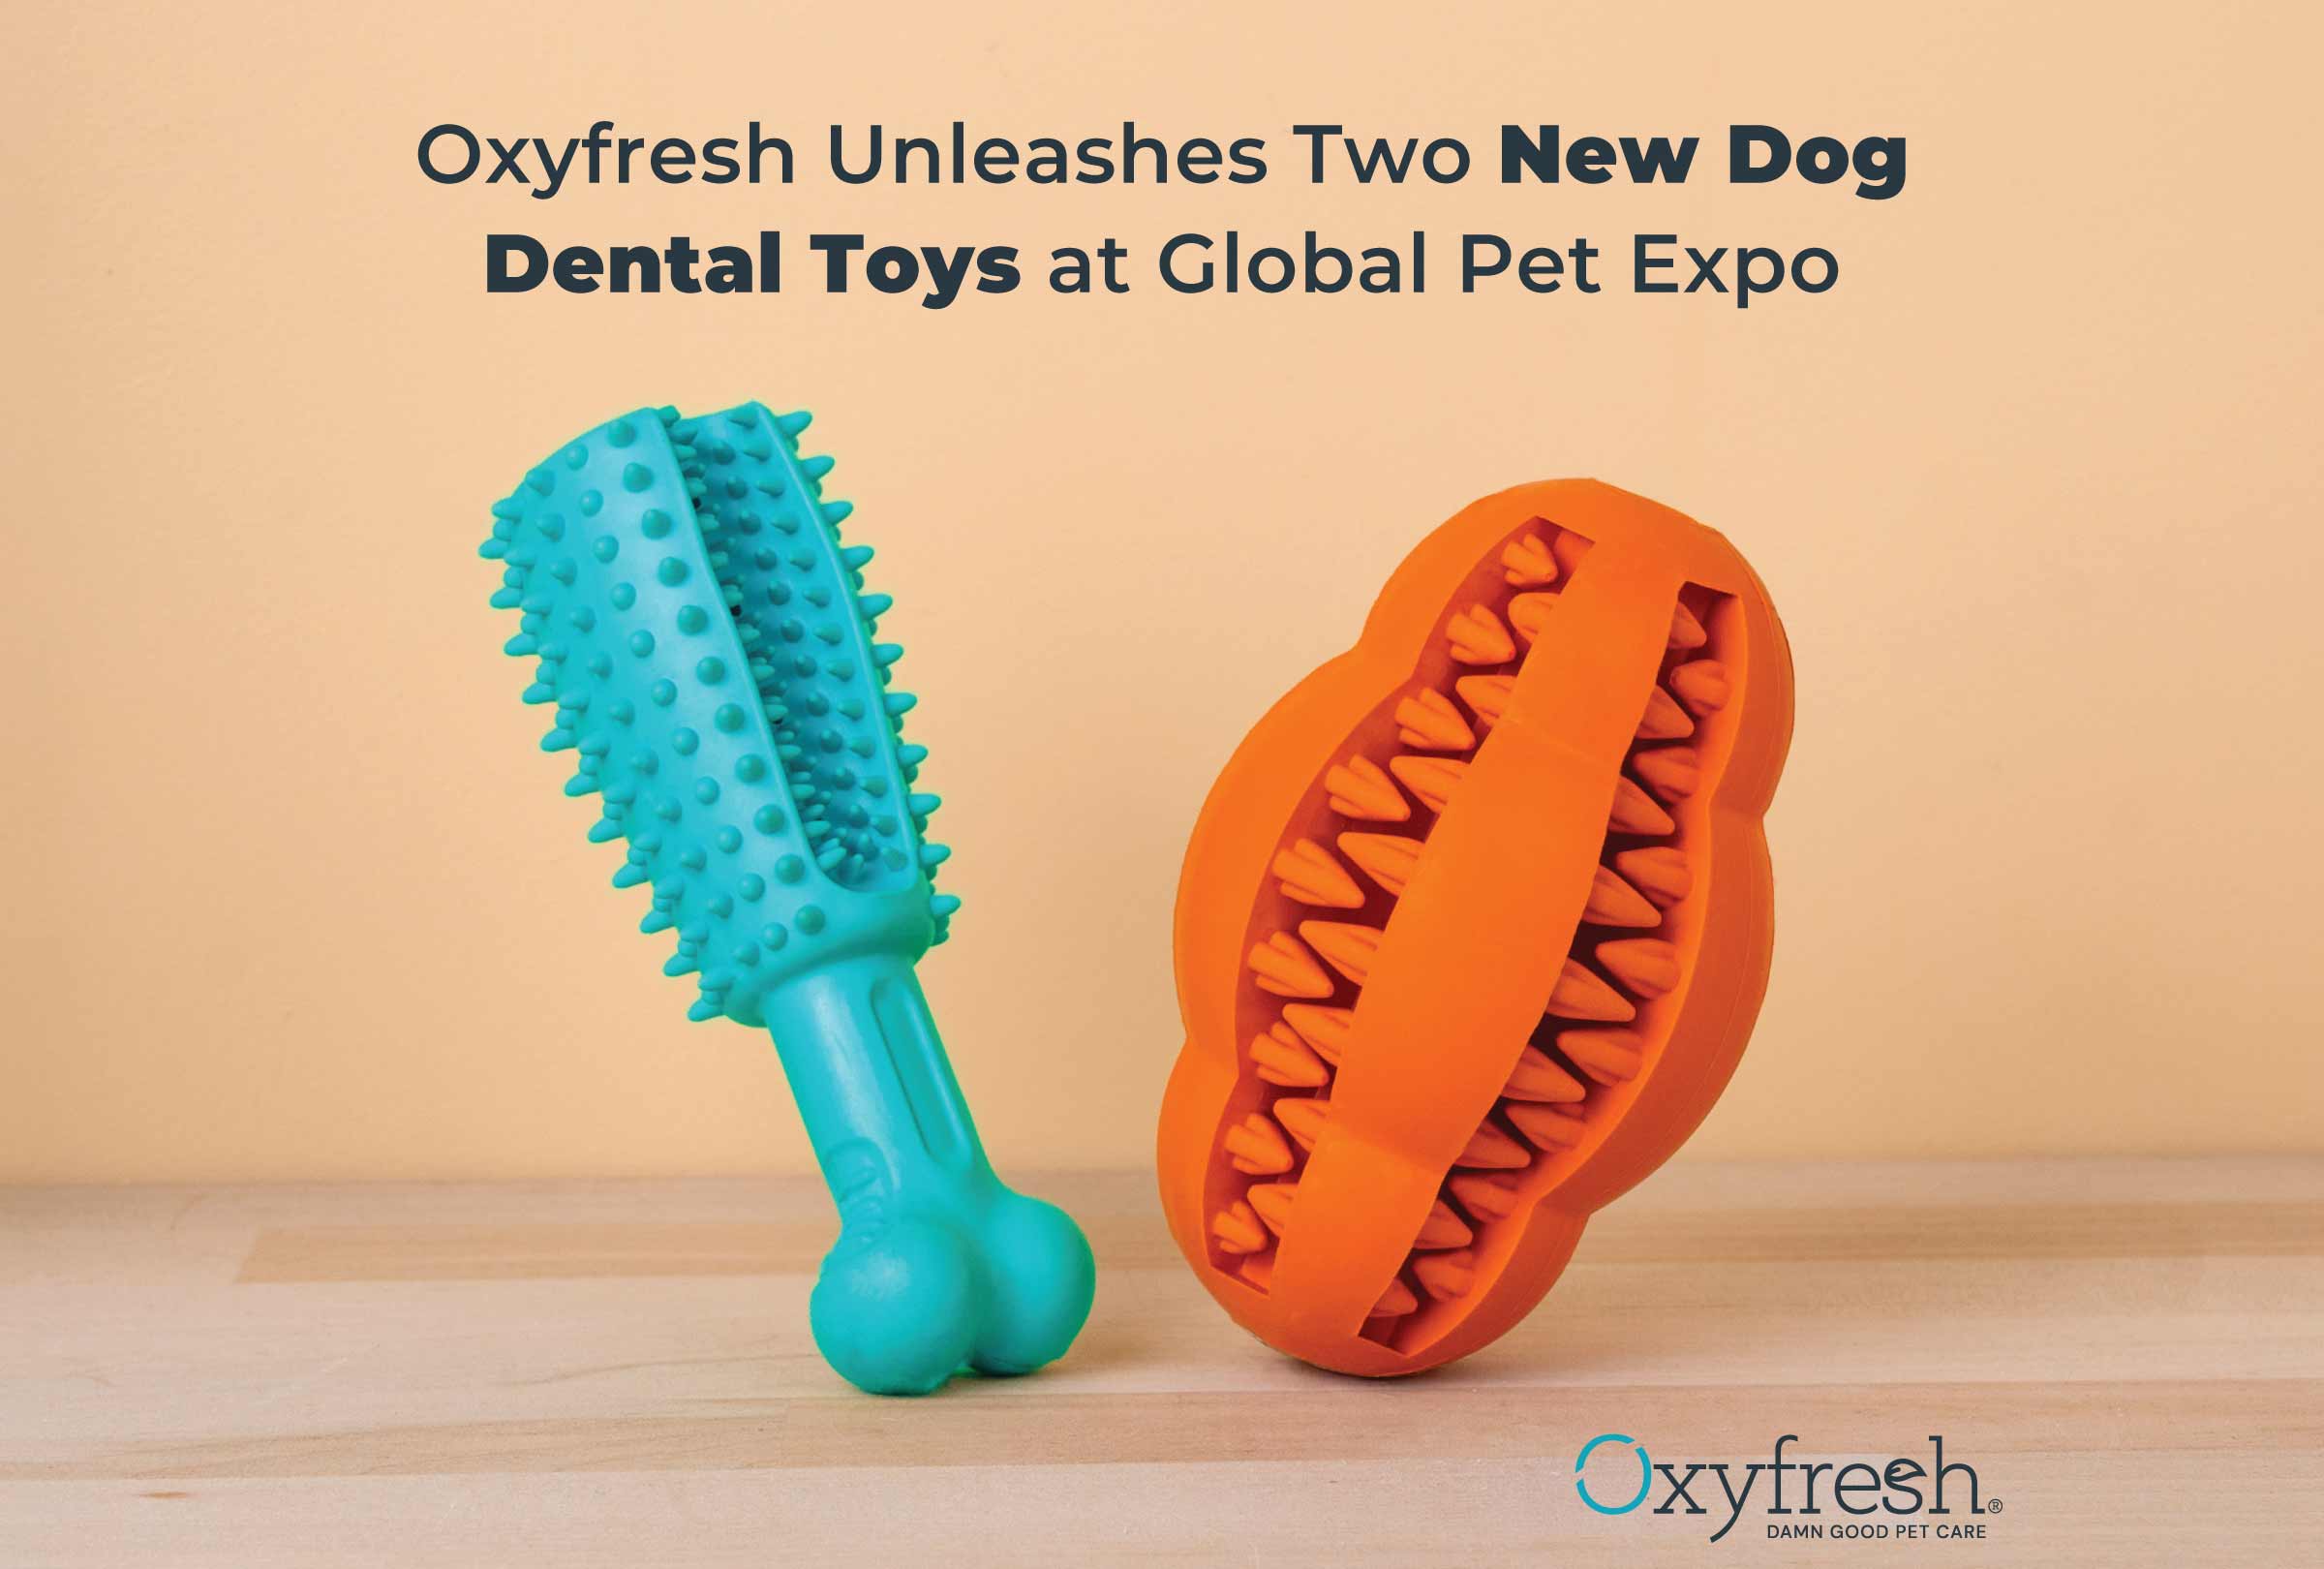 Oxyfresh Unleashes Two New Dog Dental Toys at Global Pet Expo